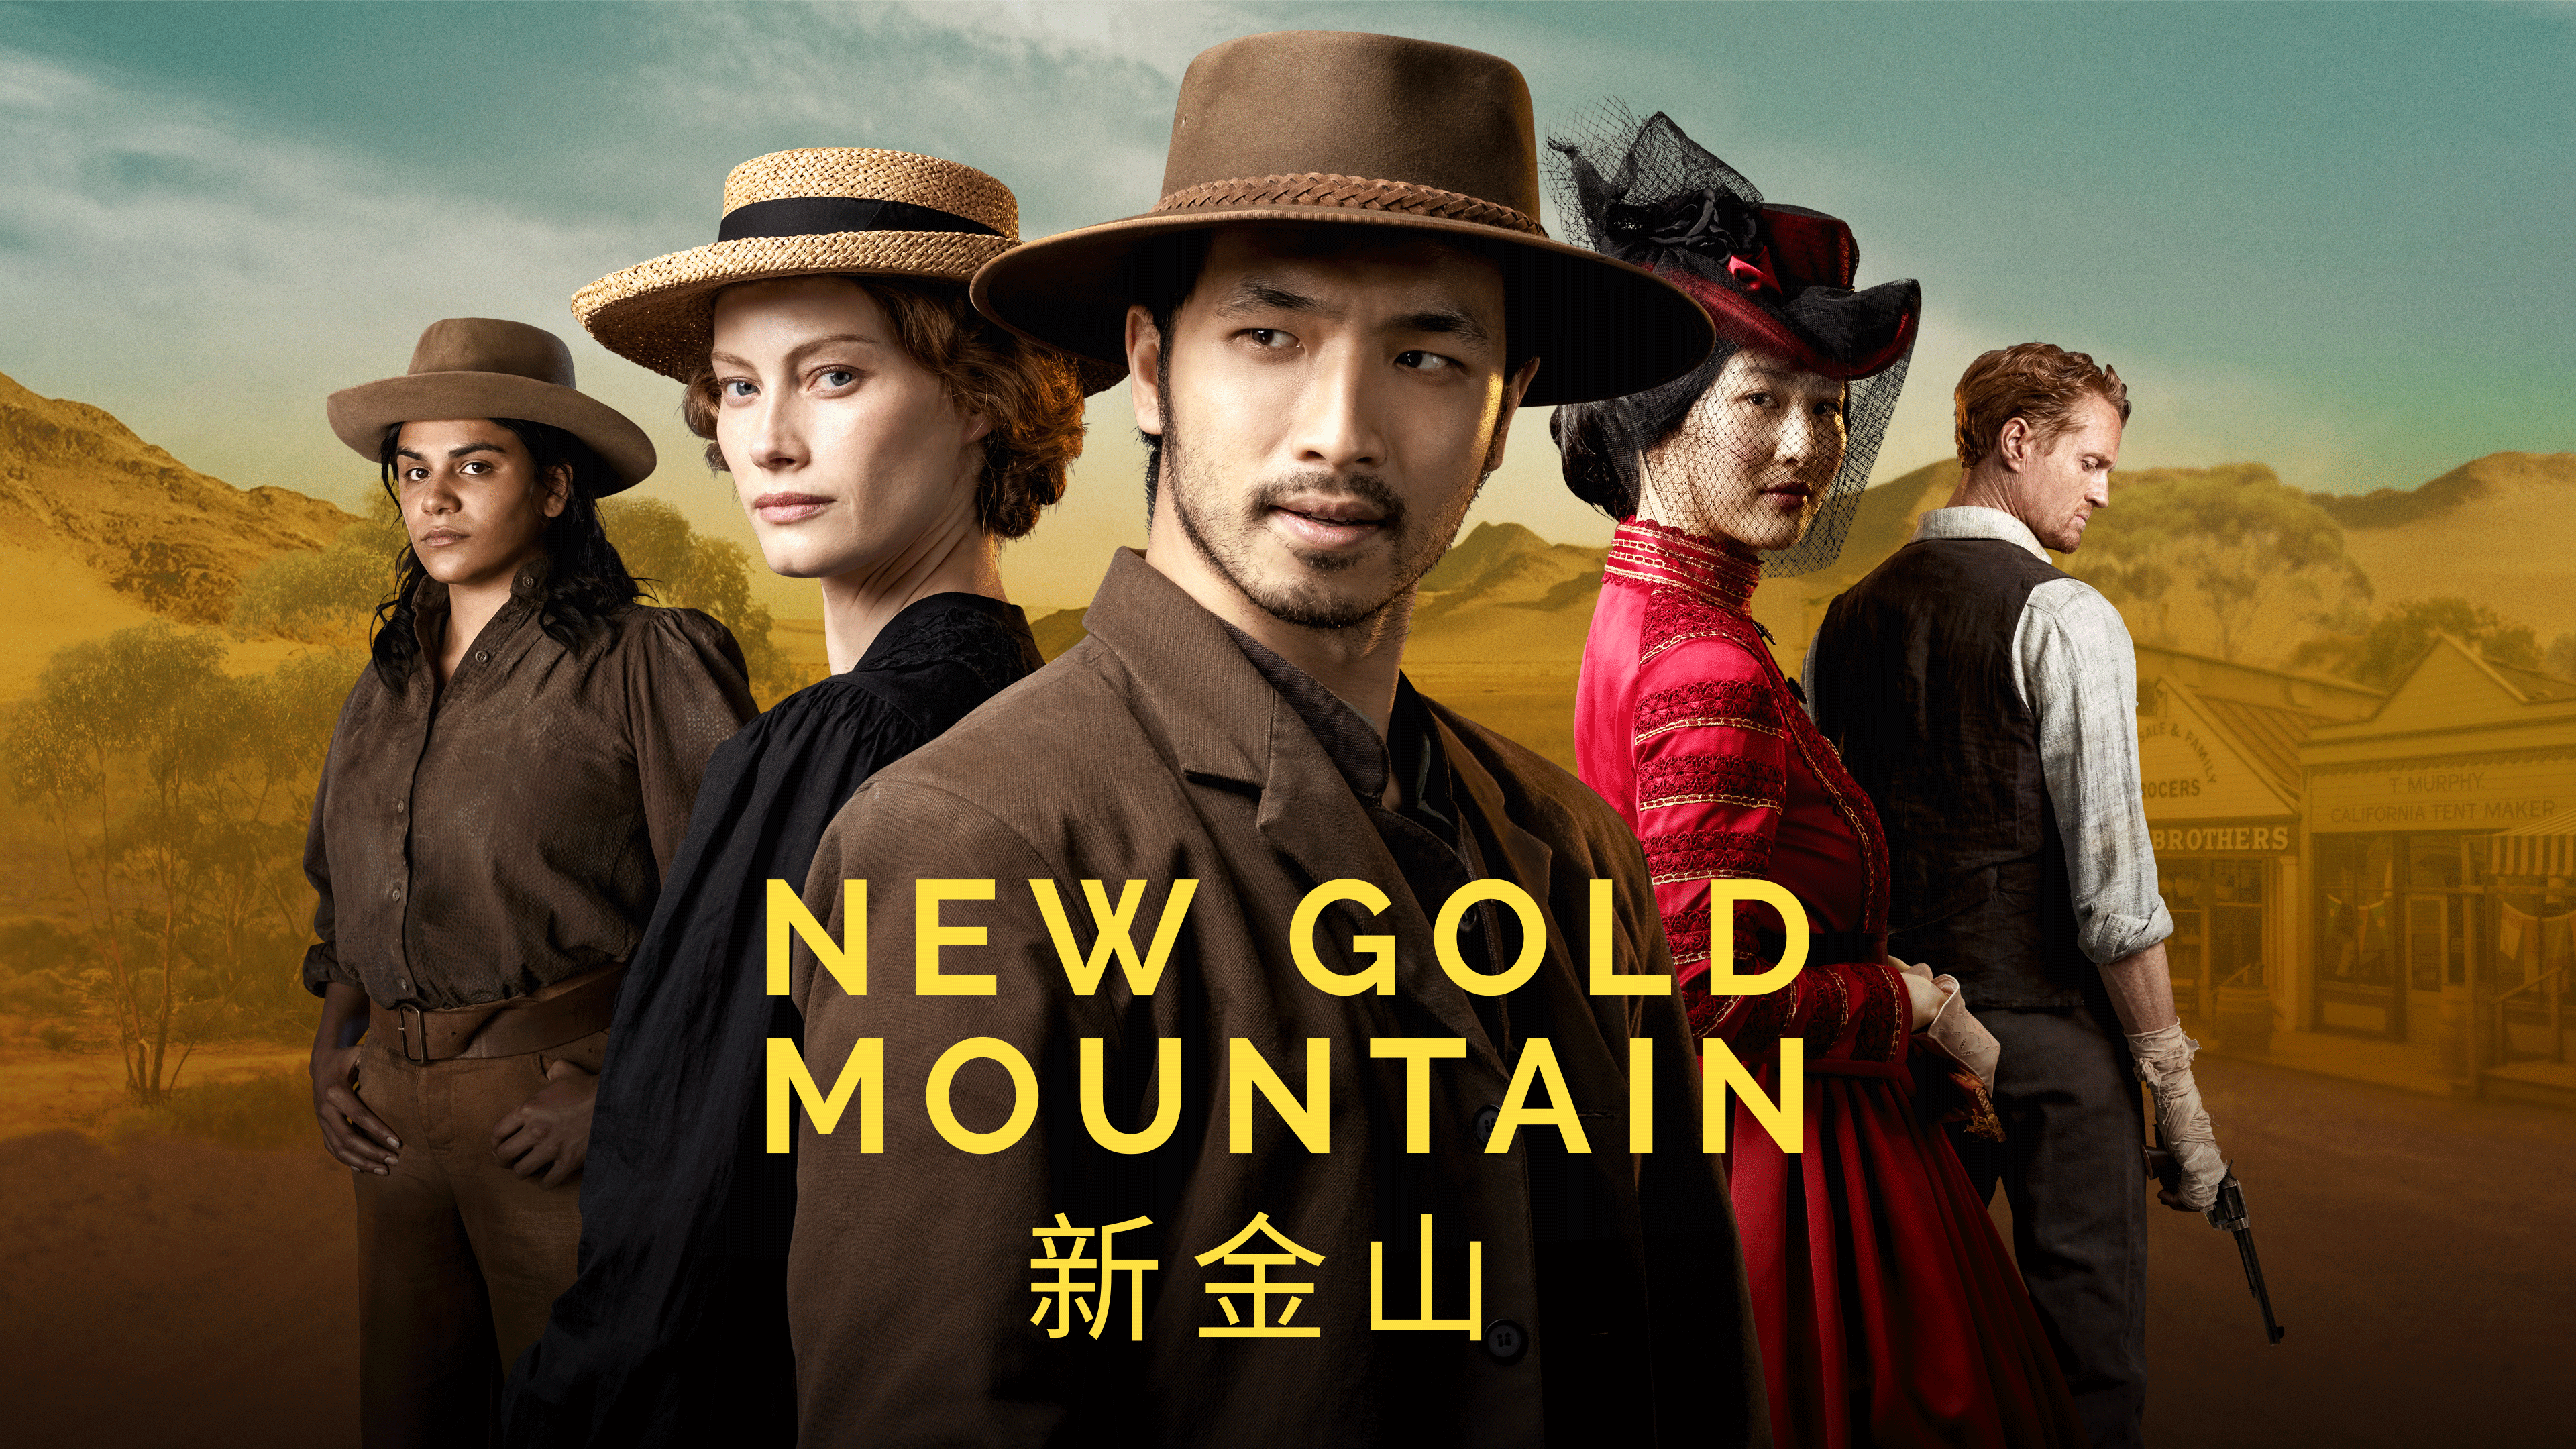 New Gold Mountain review – lush neo-western takes a new route